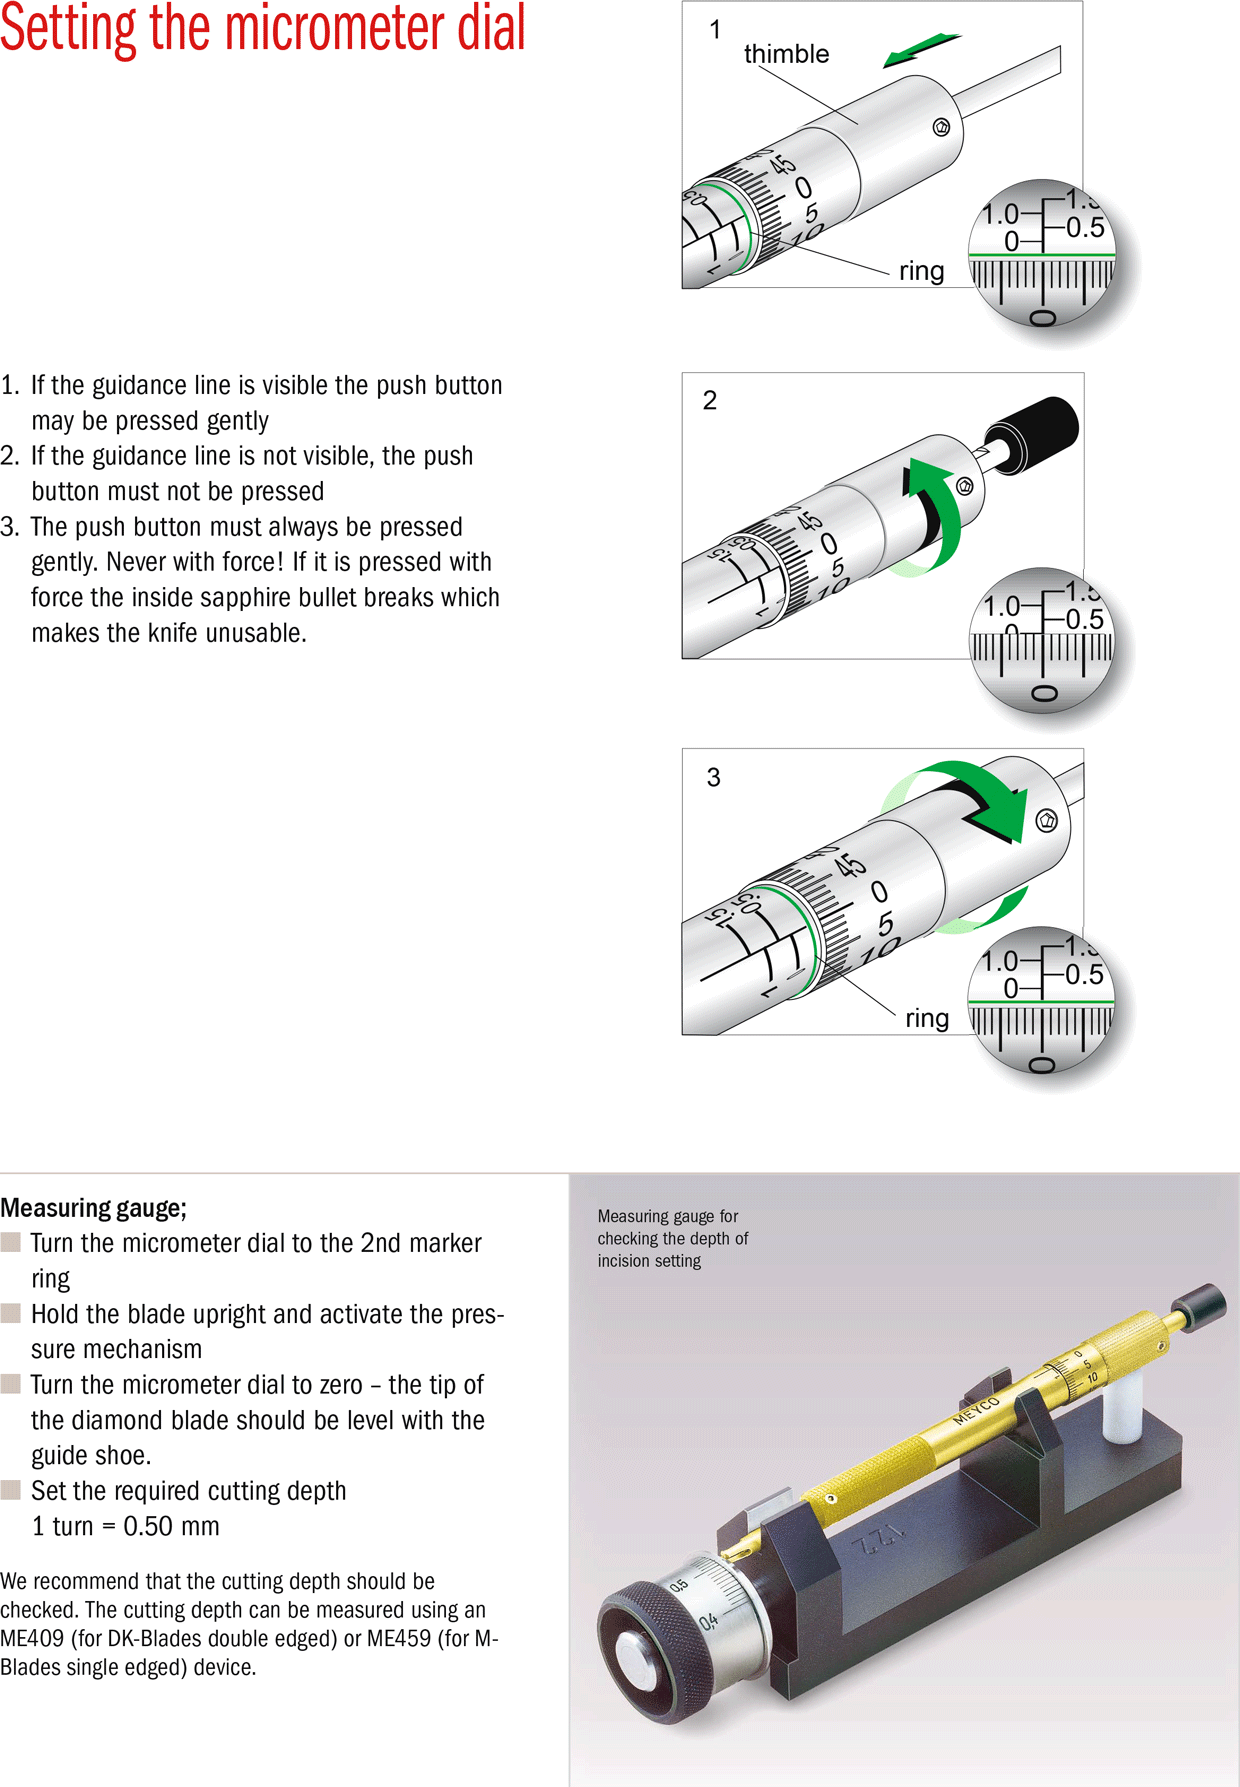 Setting the micrometer dial and handling instructions for the micrometer knives